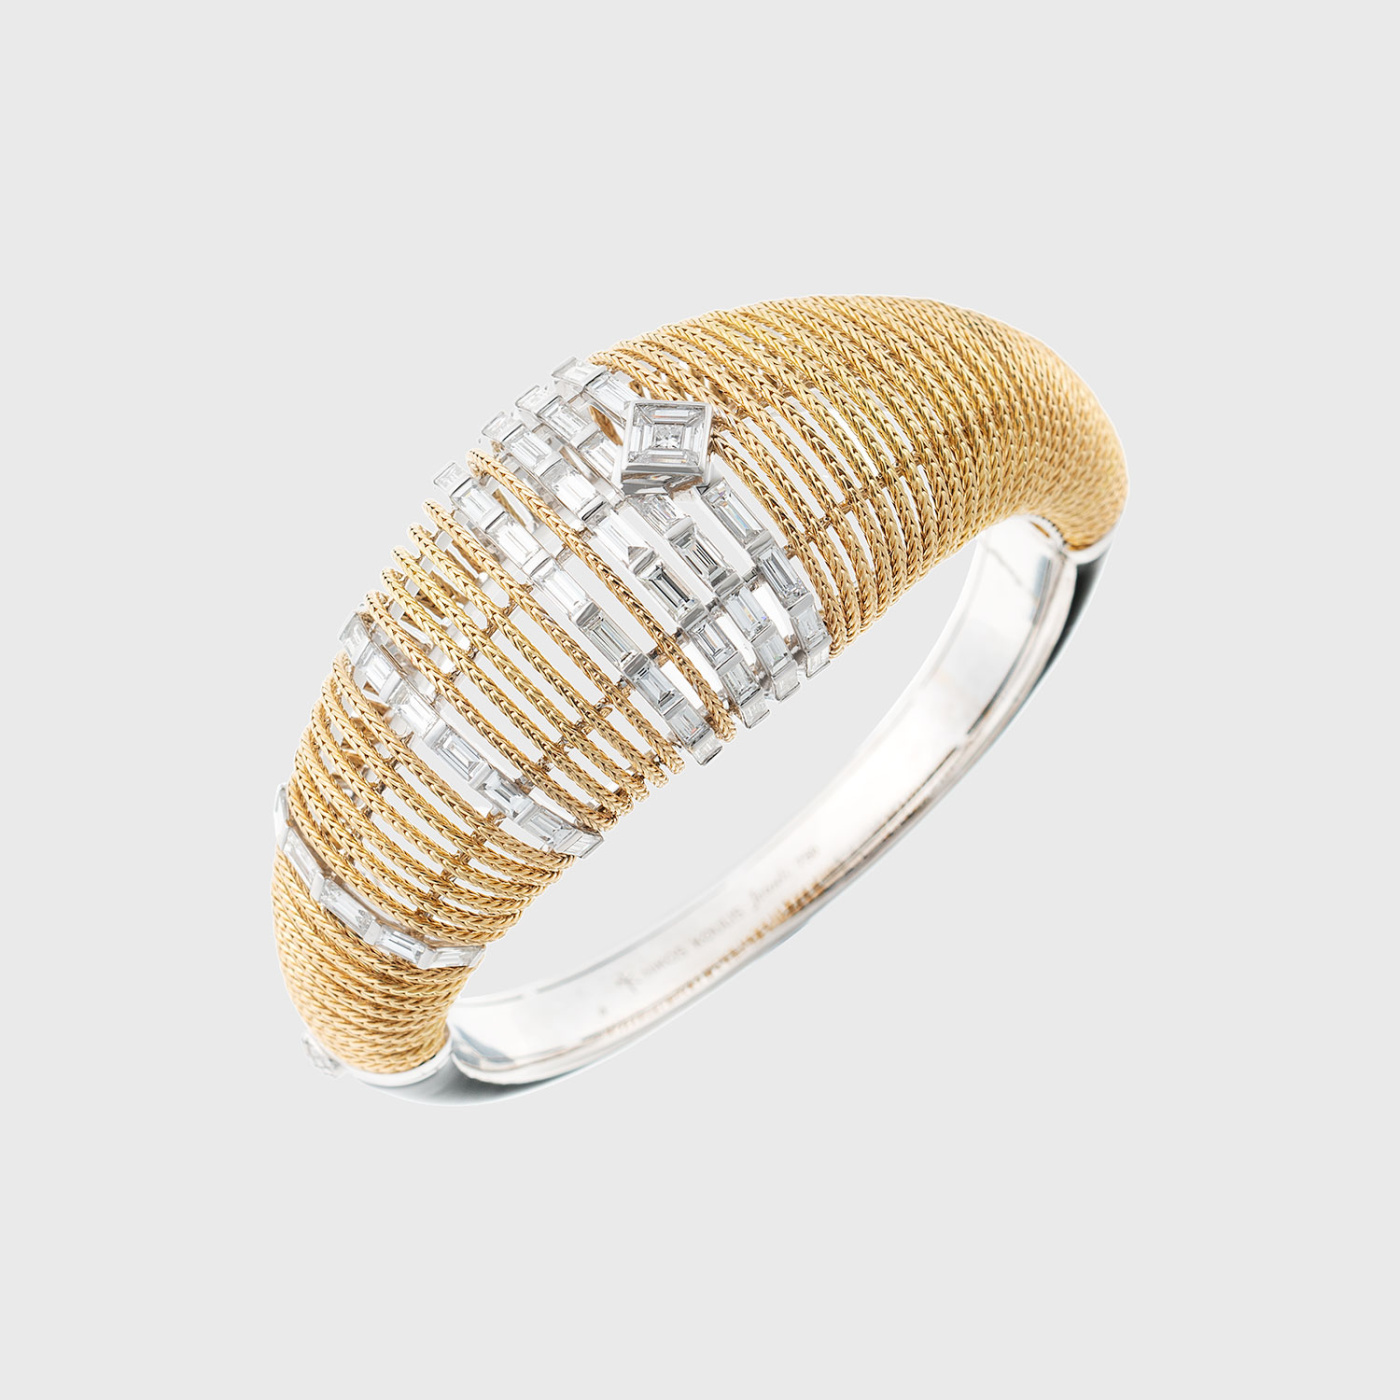 Yellow gold collar cuff bracelet with white diamond baguettes and black enamel